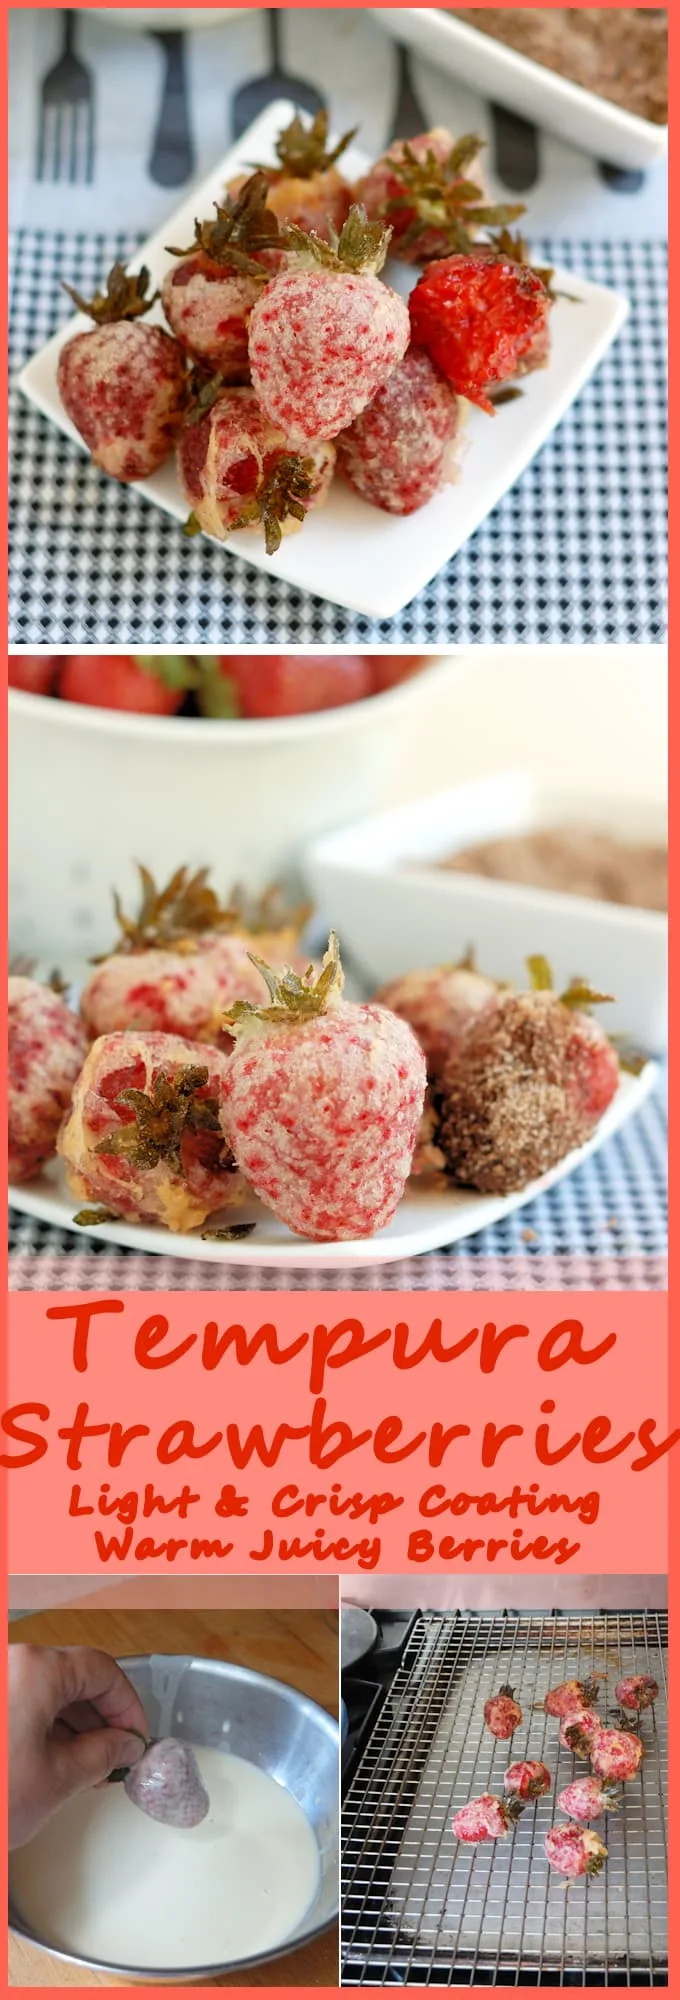 Have you ever eaten strawberries still warm from the sun? That's what Tempura Strawberries taste like. Get the recipe for this impressive yet easy dessert #SundaySupper